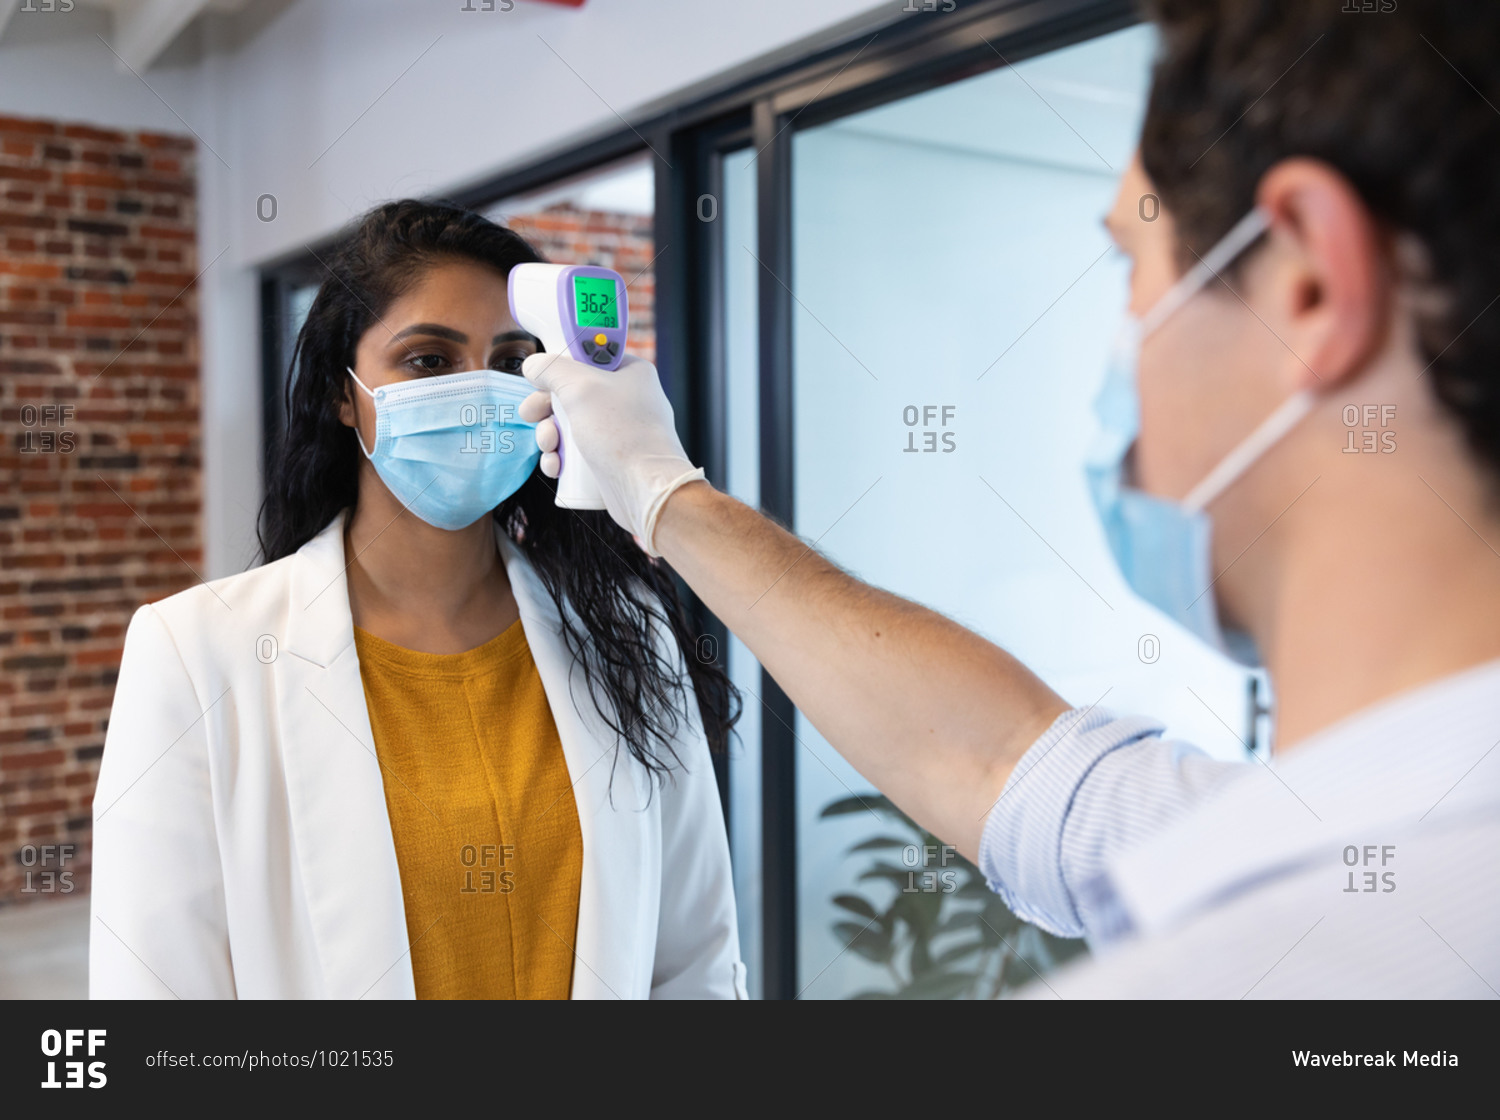 Mixed race woman and Caucasian man working in a casual office, wearing face masks, a man taking her temperature. Social distancing in the workplace during Coronavirus Covid 19 pandemic.